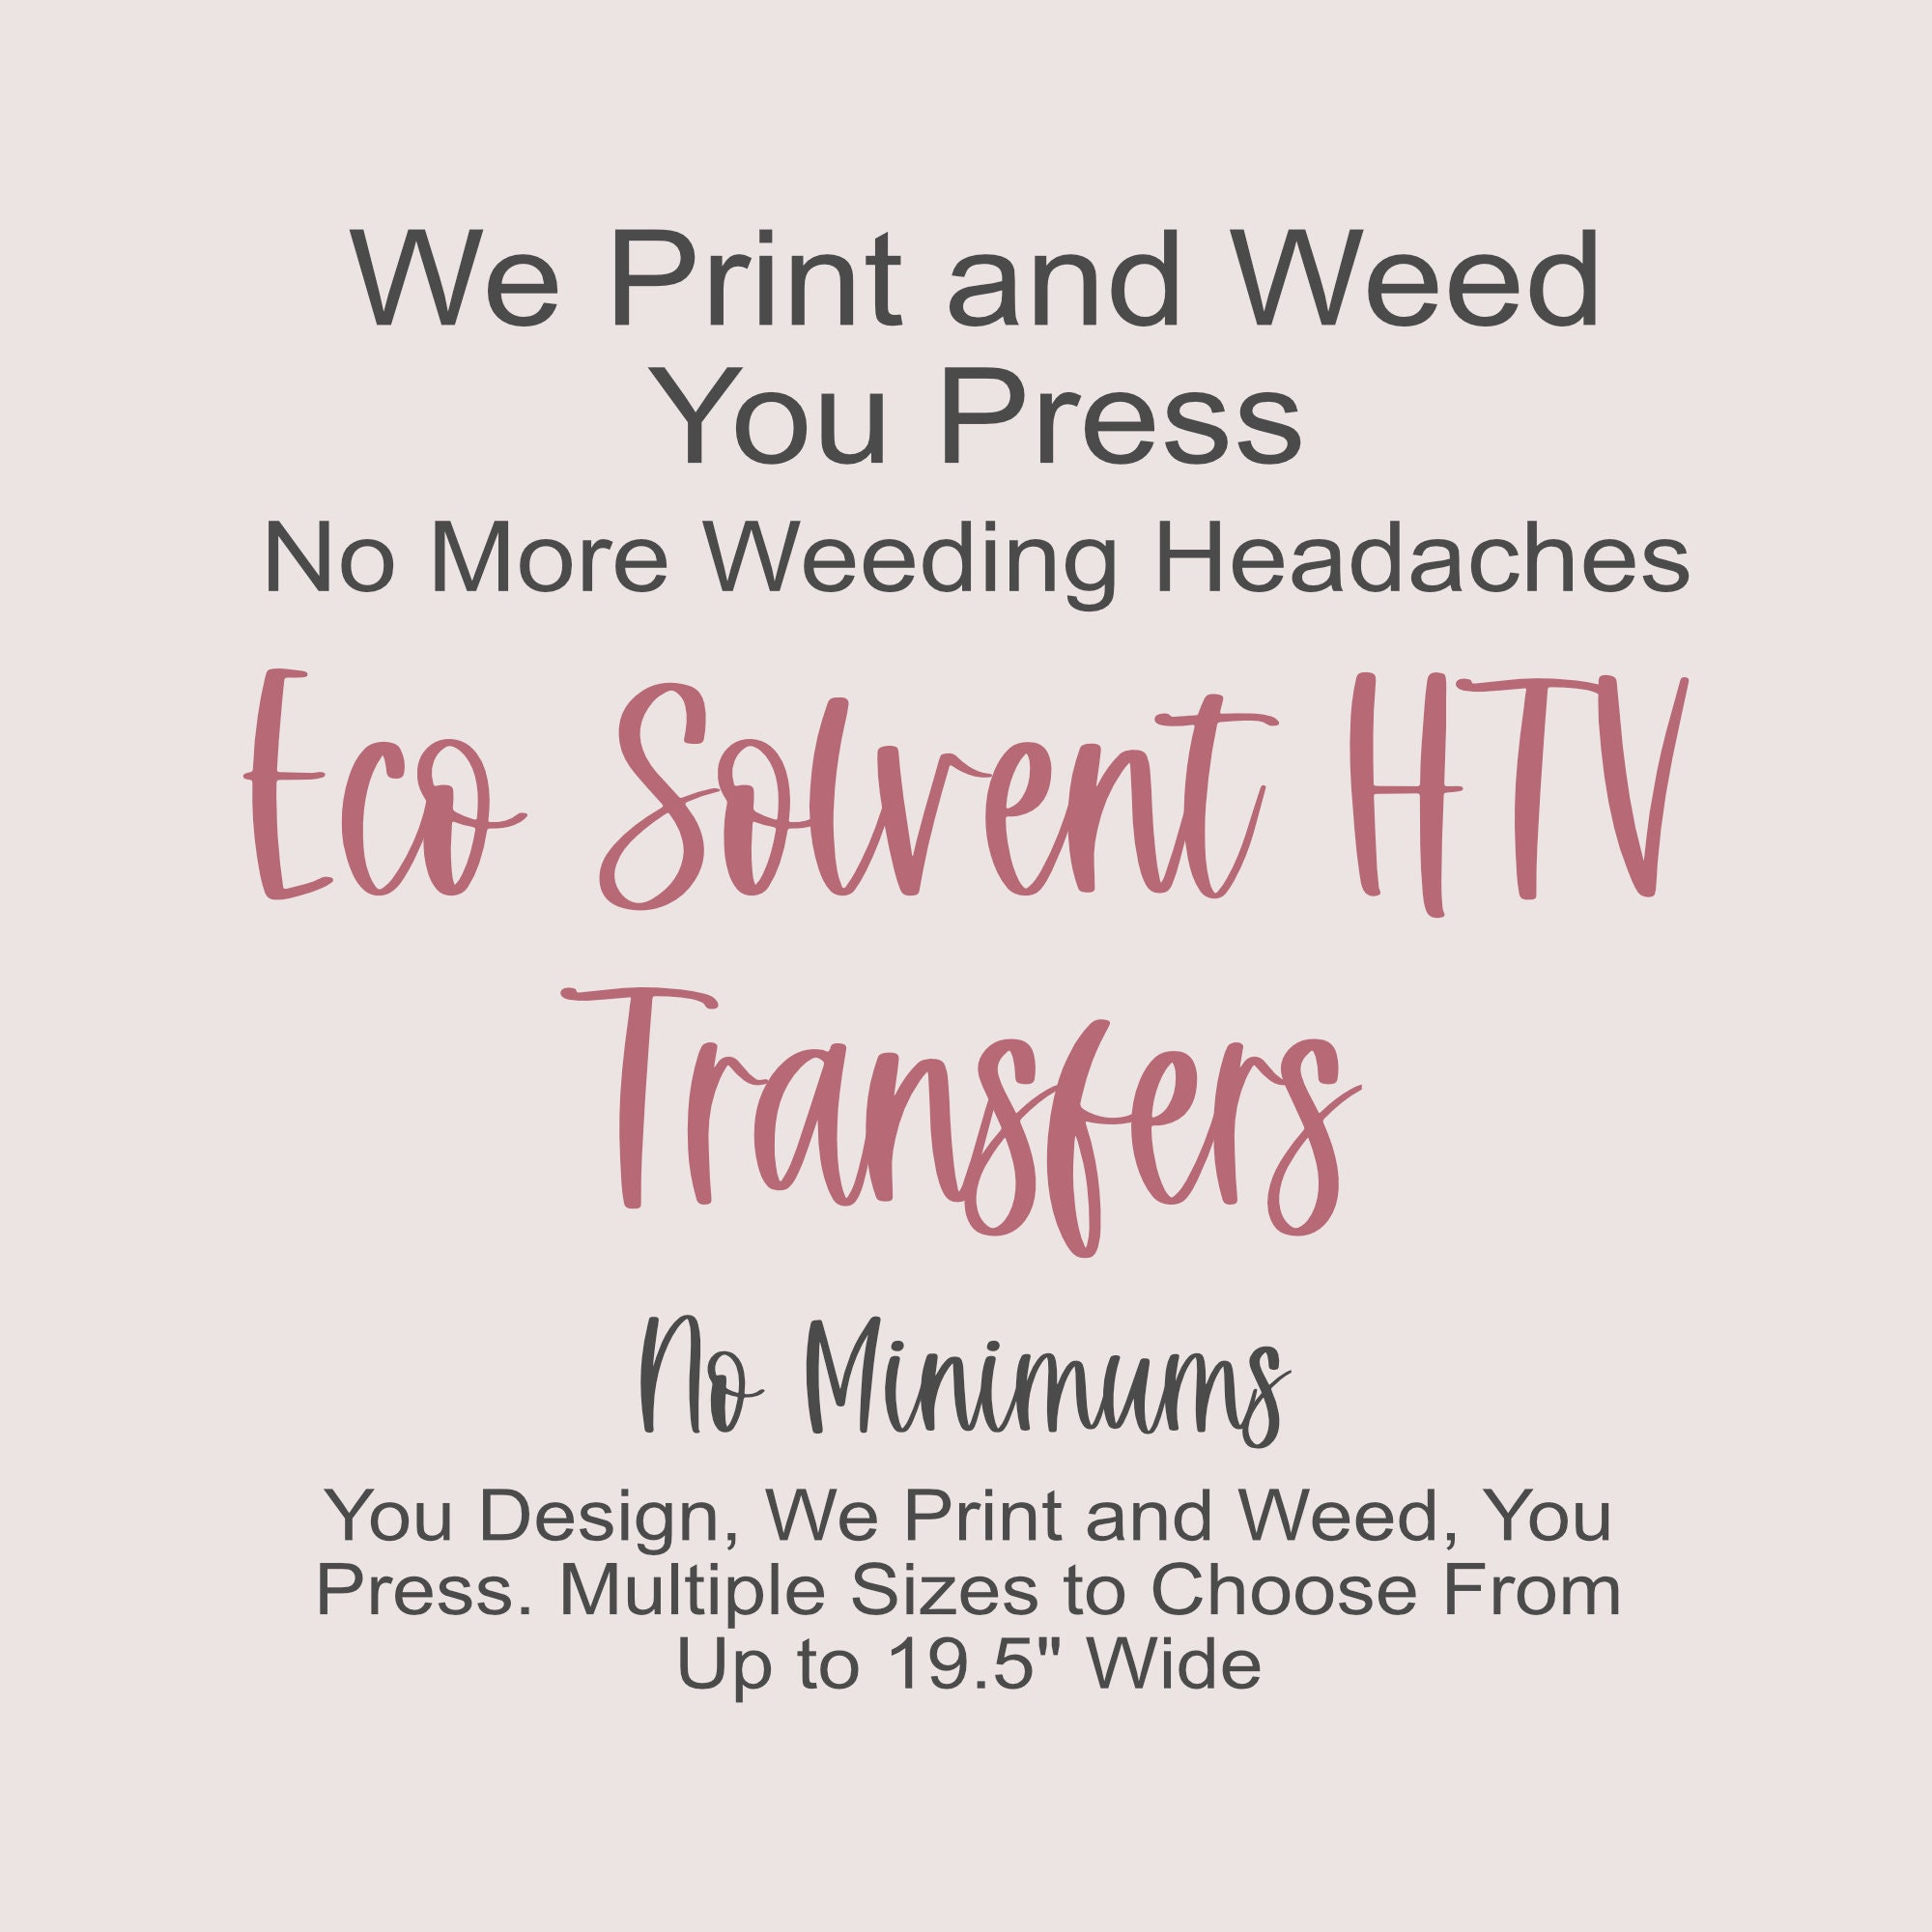 Eco Solvent HTV PRINTABLE Vinyl by the Roll 